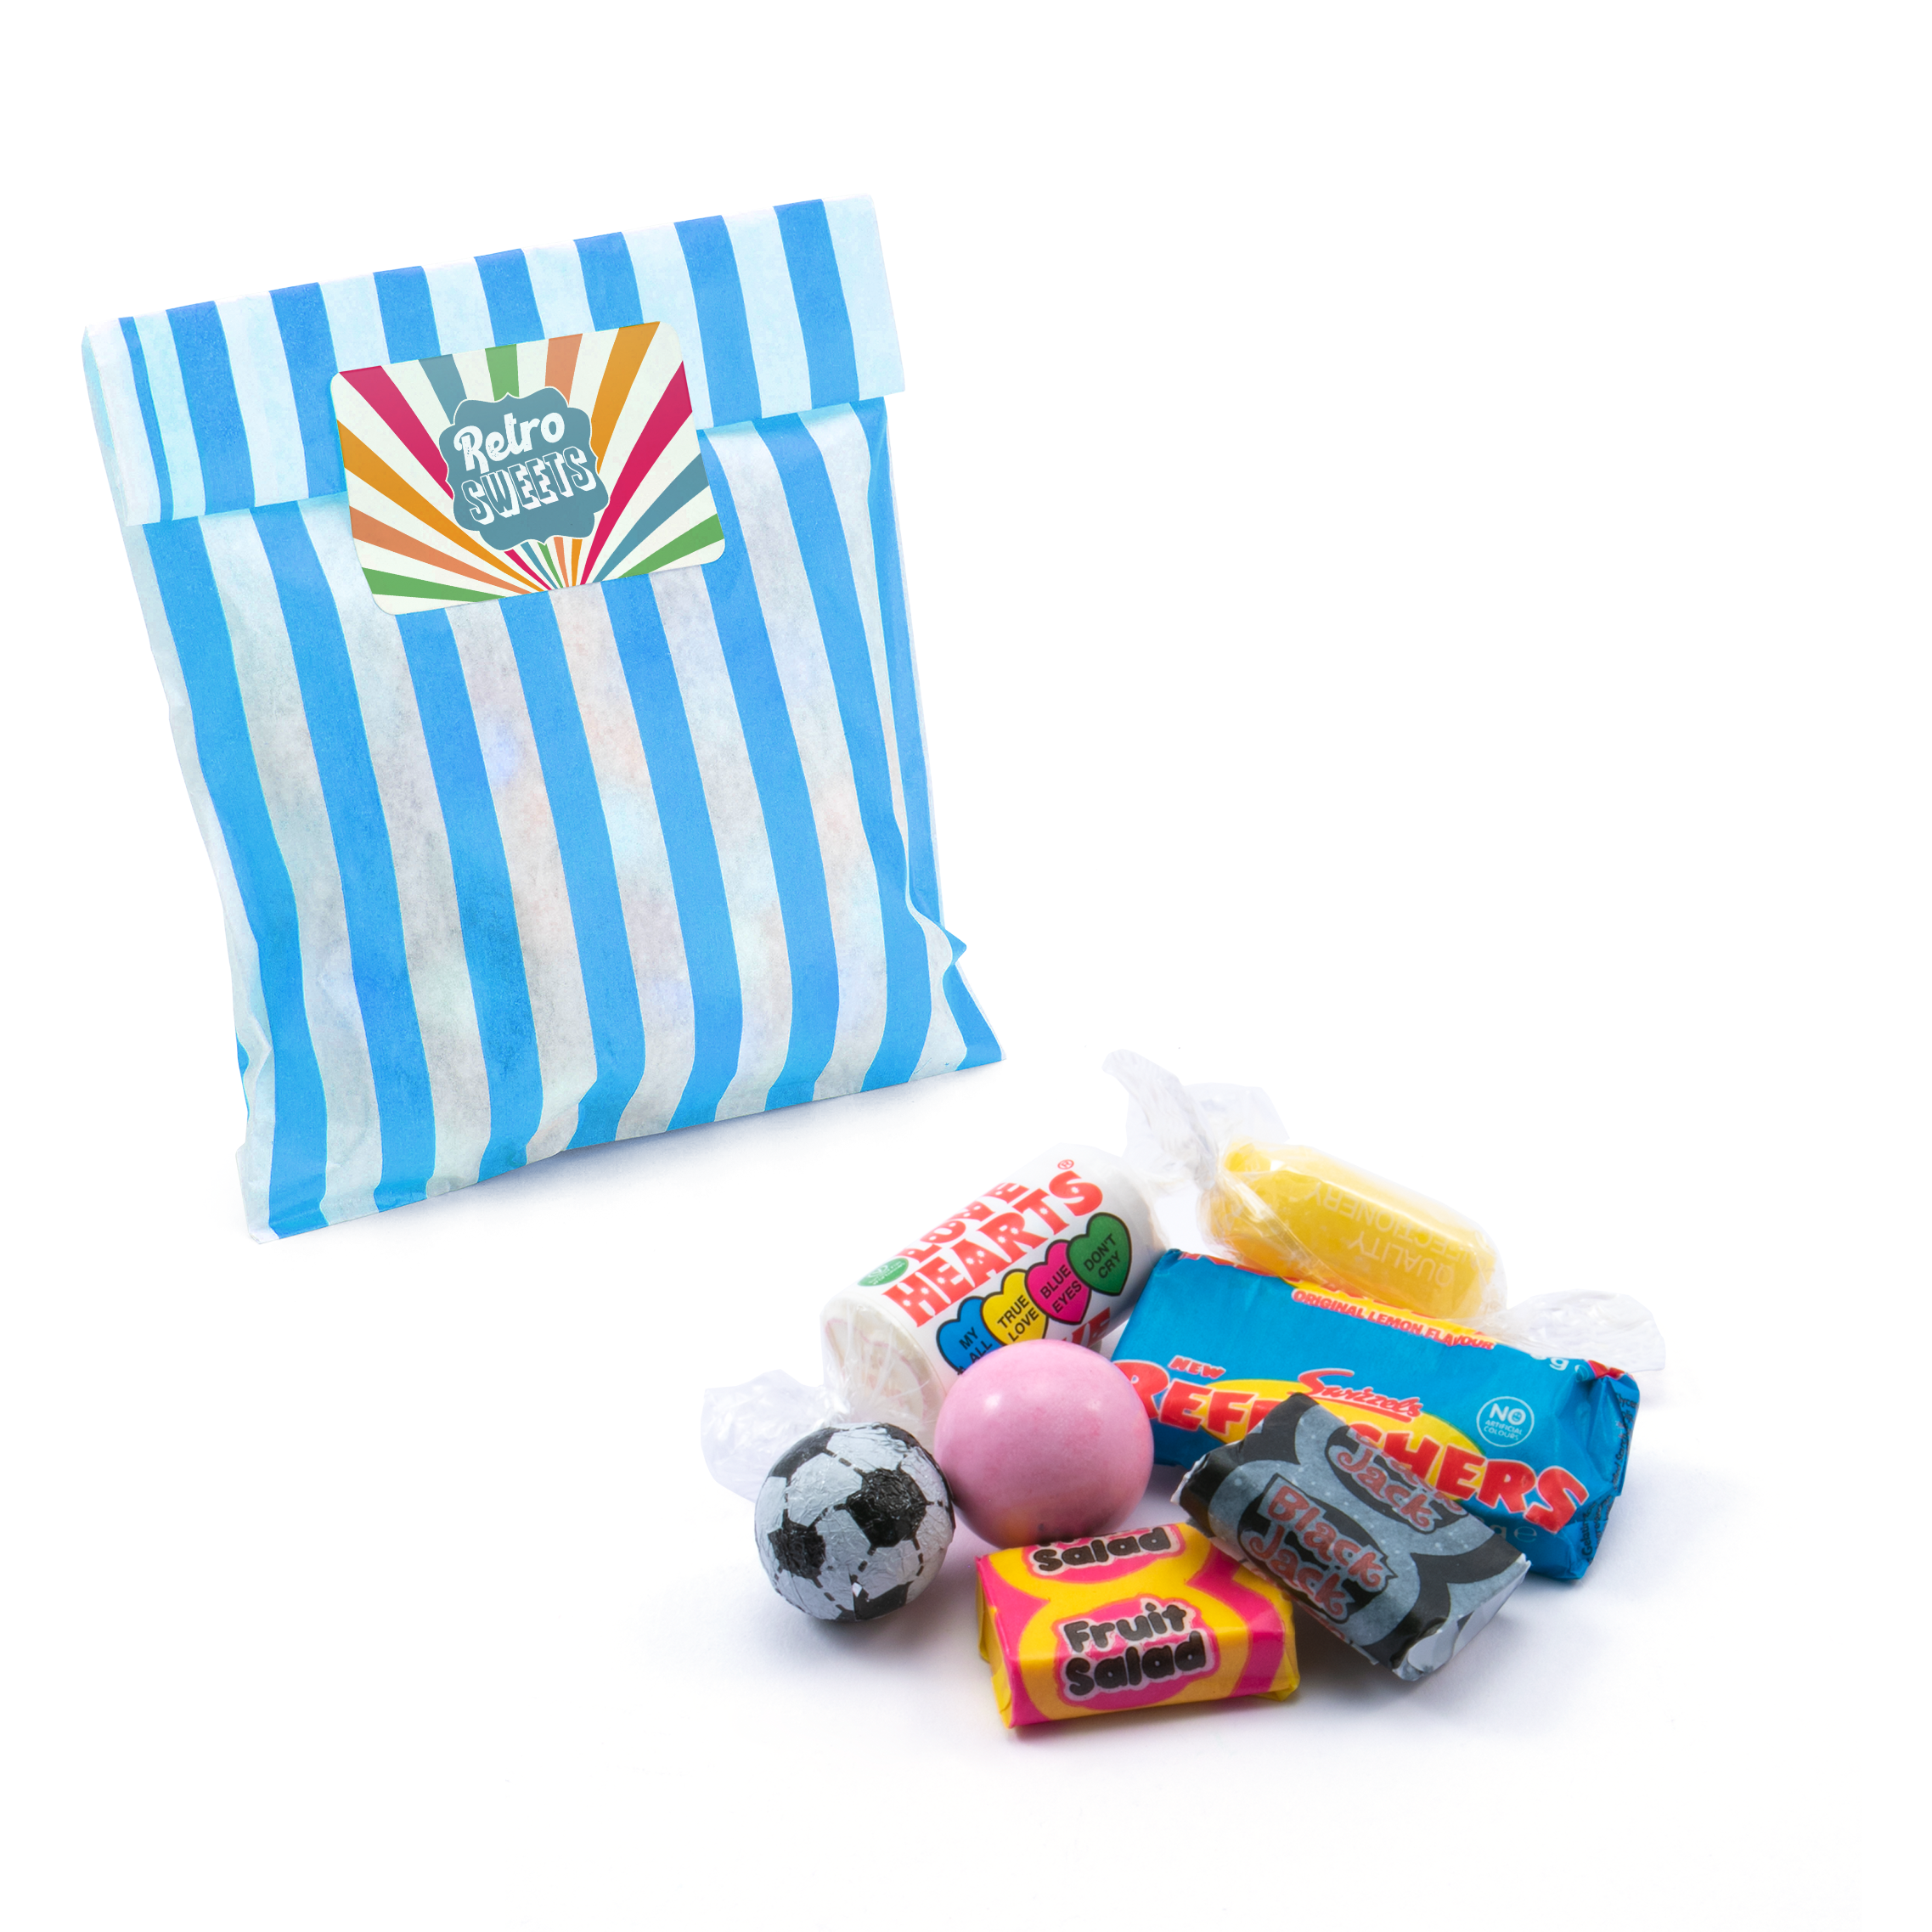 Sweeten Your Trade Show Presence With Promotional Branded Sweets